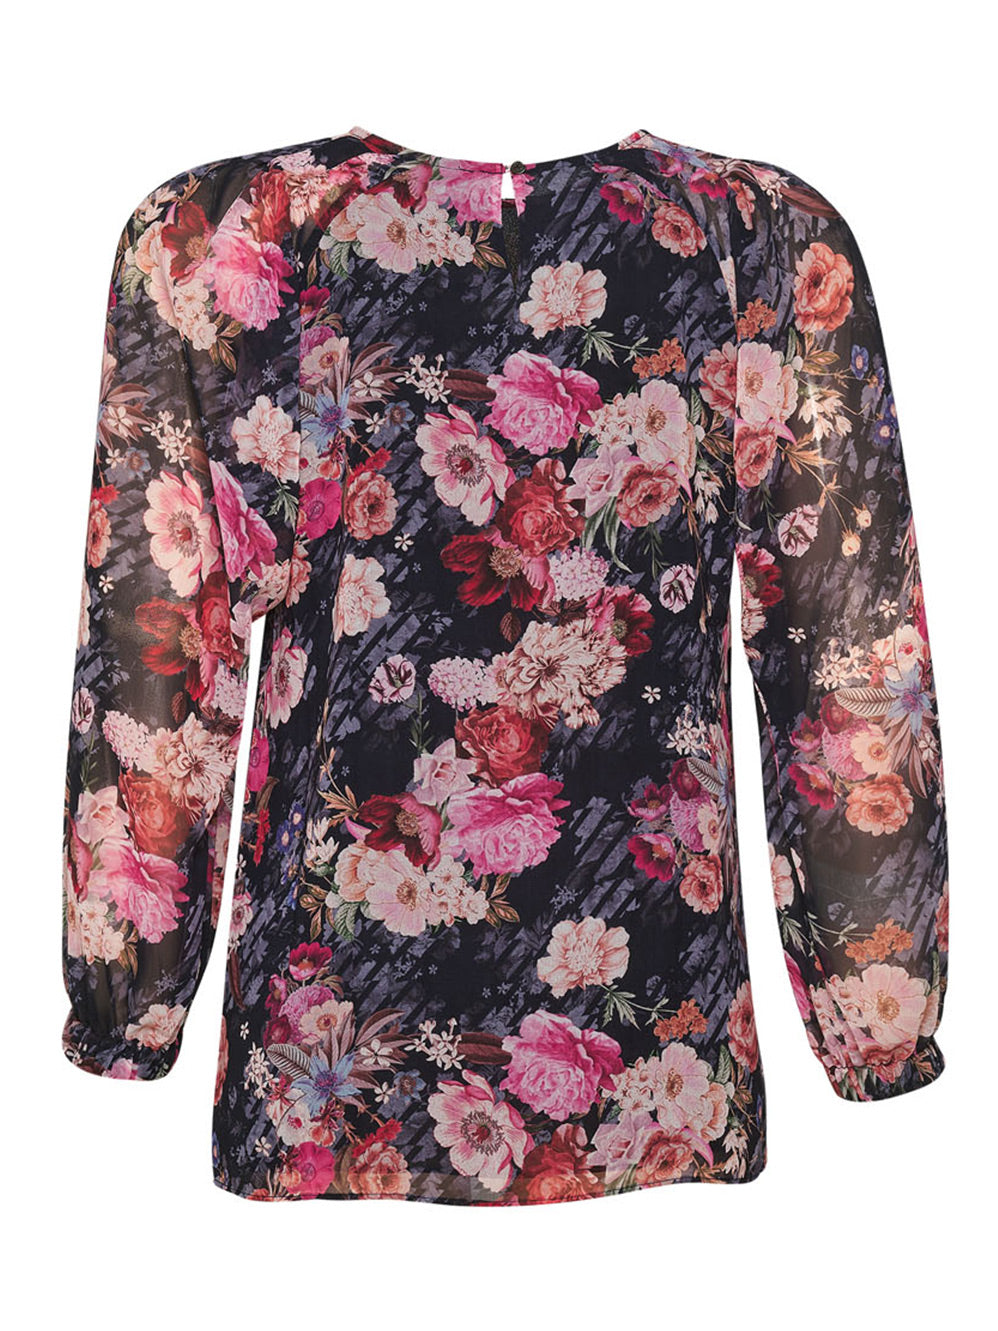 MADLY SWEETLY FLORIENT TOP